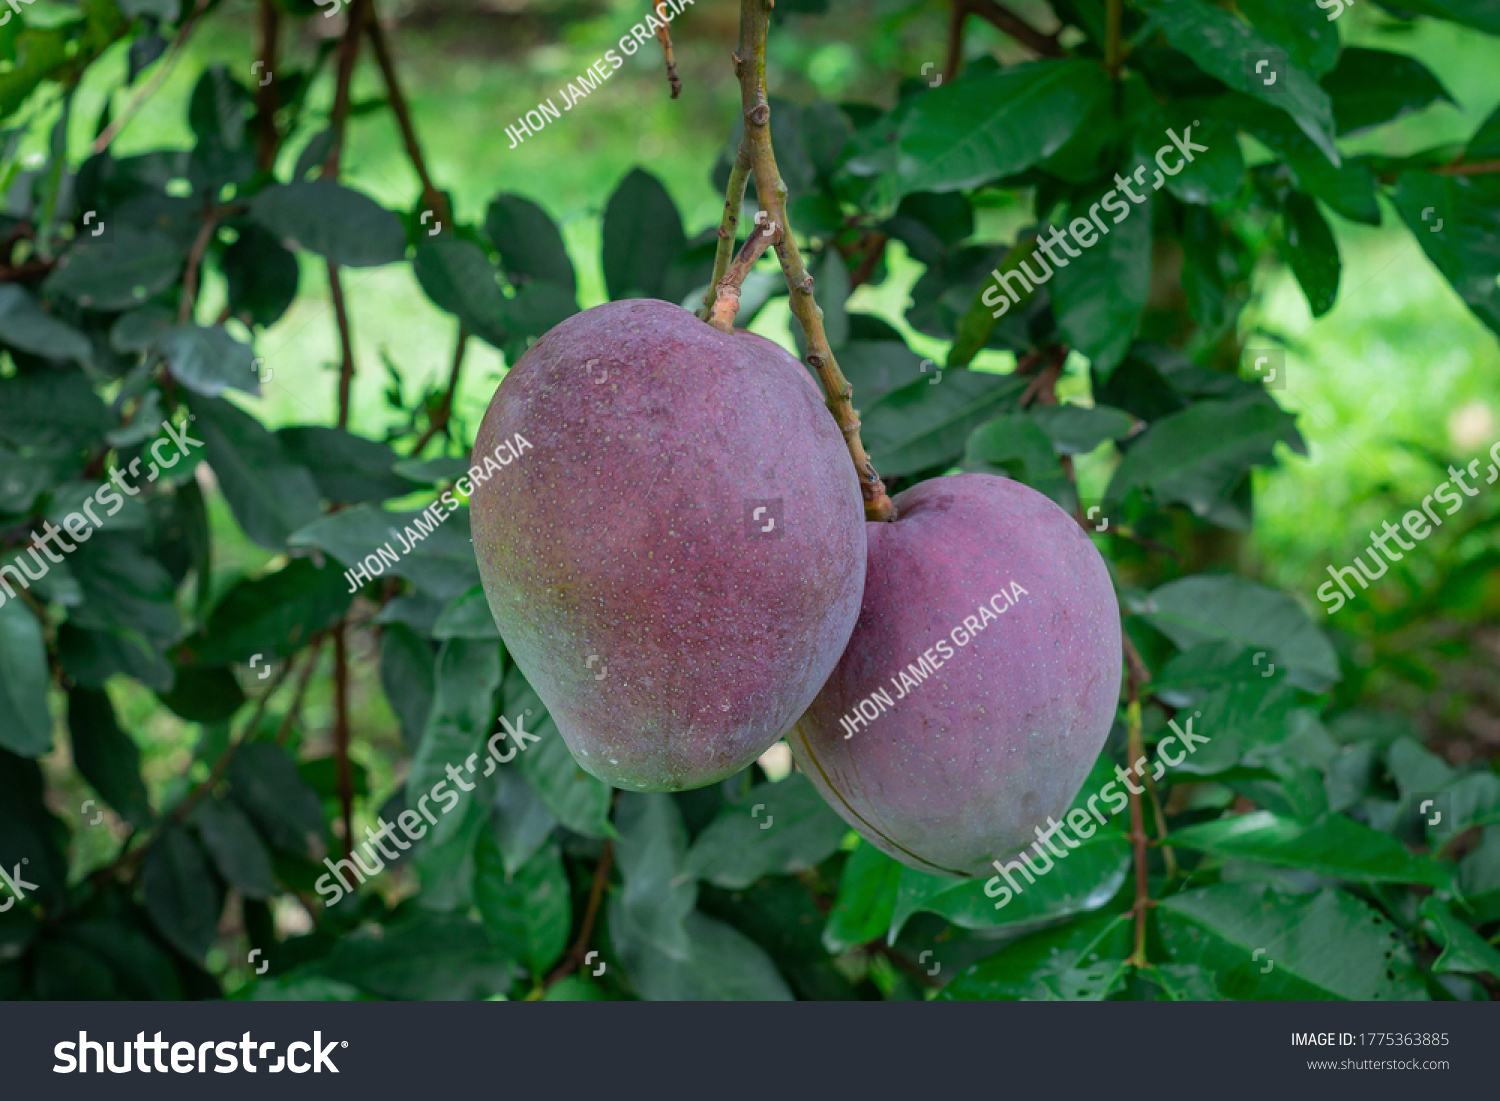 Mango Tommy Atkins photograph taken of two mangoes attached to the tree #1775363885